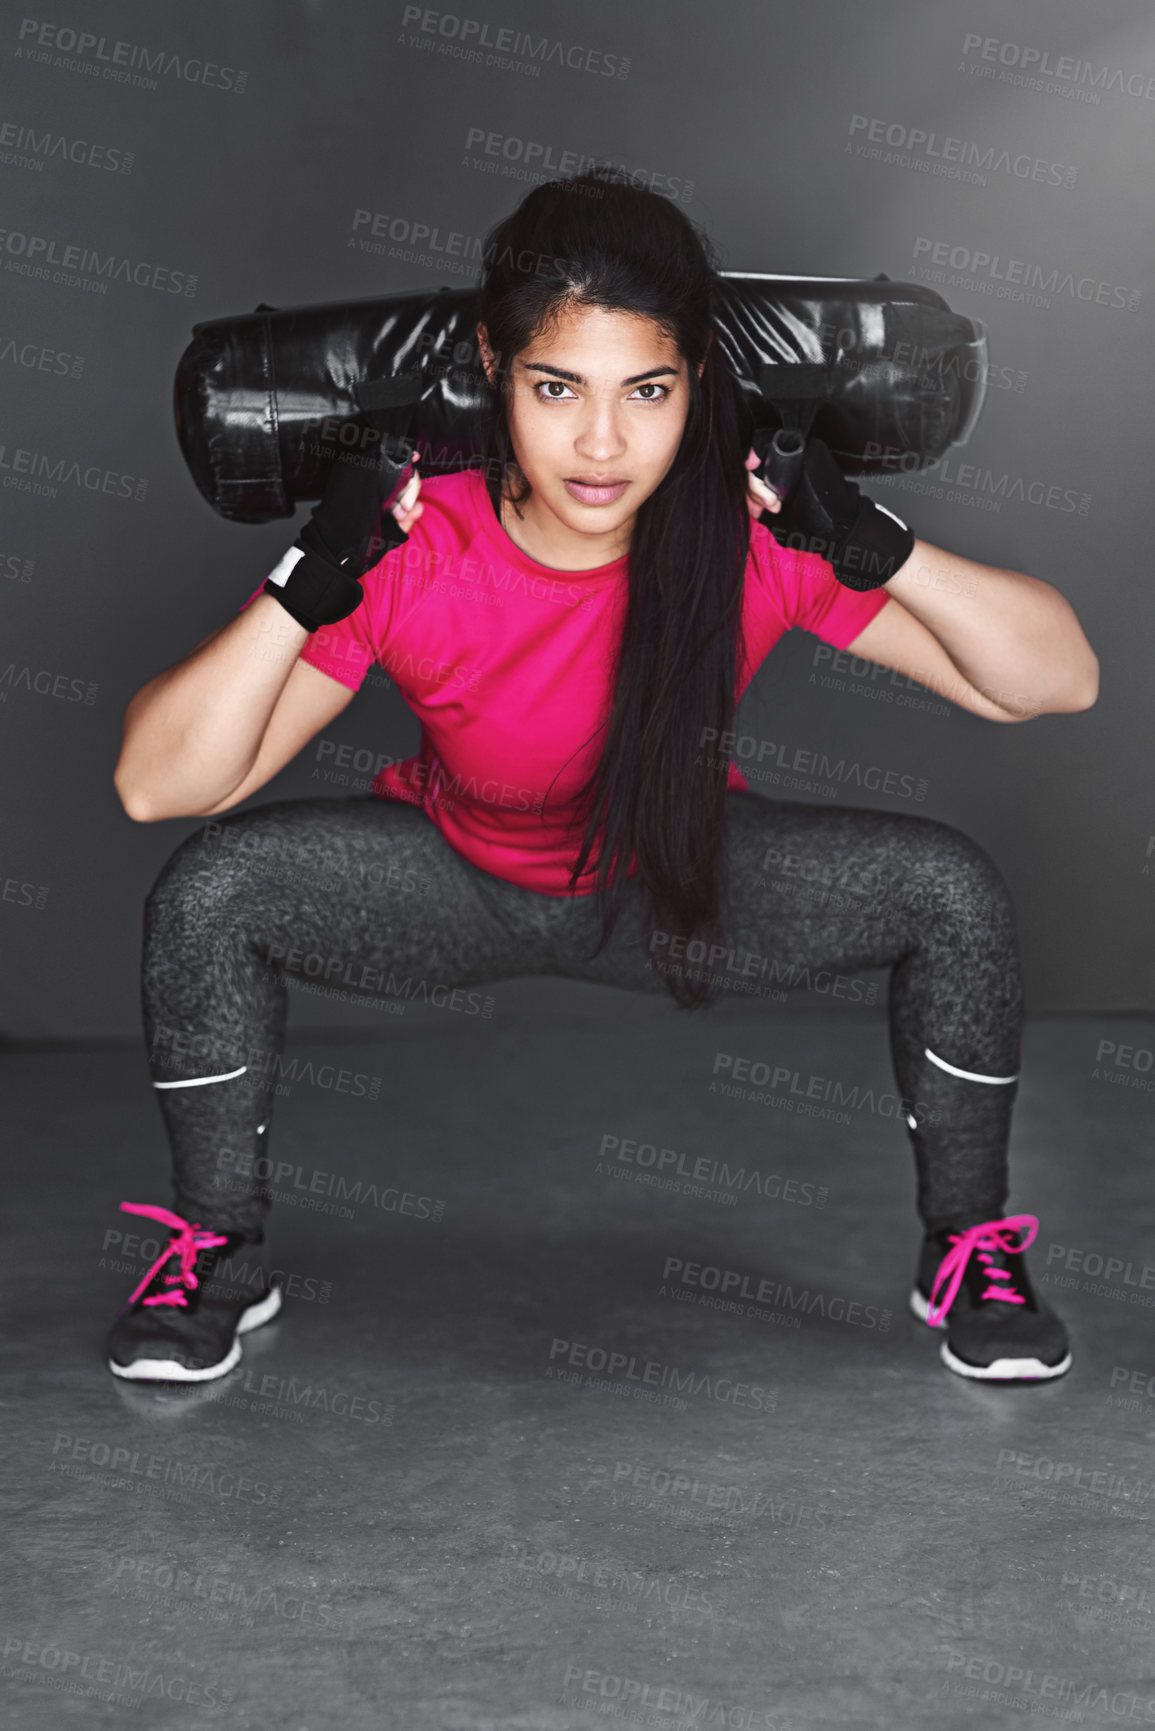 Buy stock photo Studio shot of an attractive young woman working out with dumbbells  against a gray background